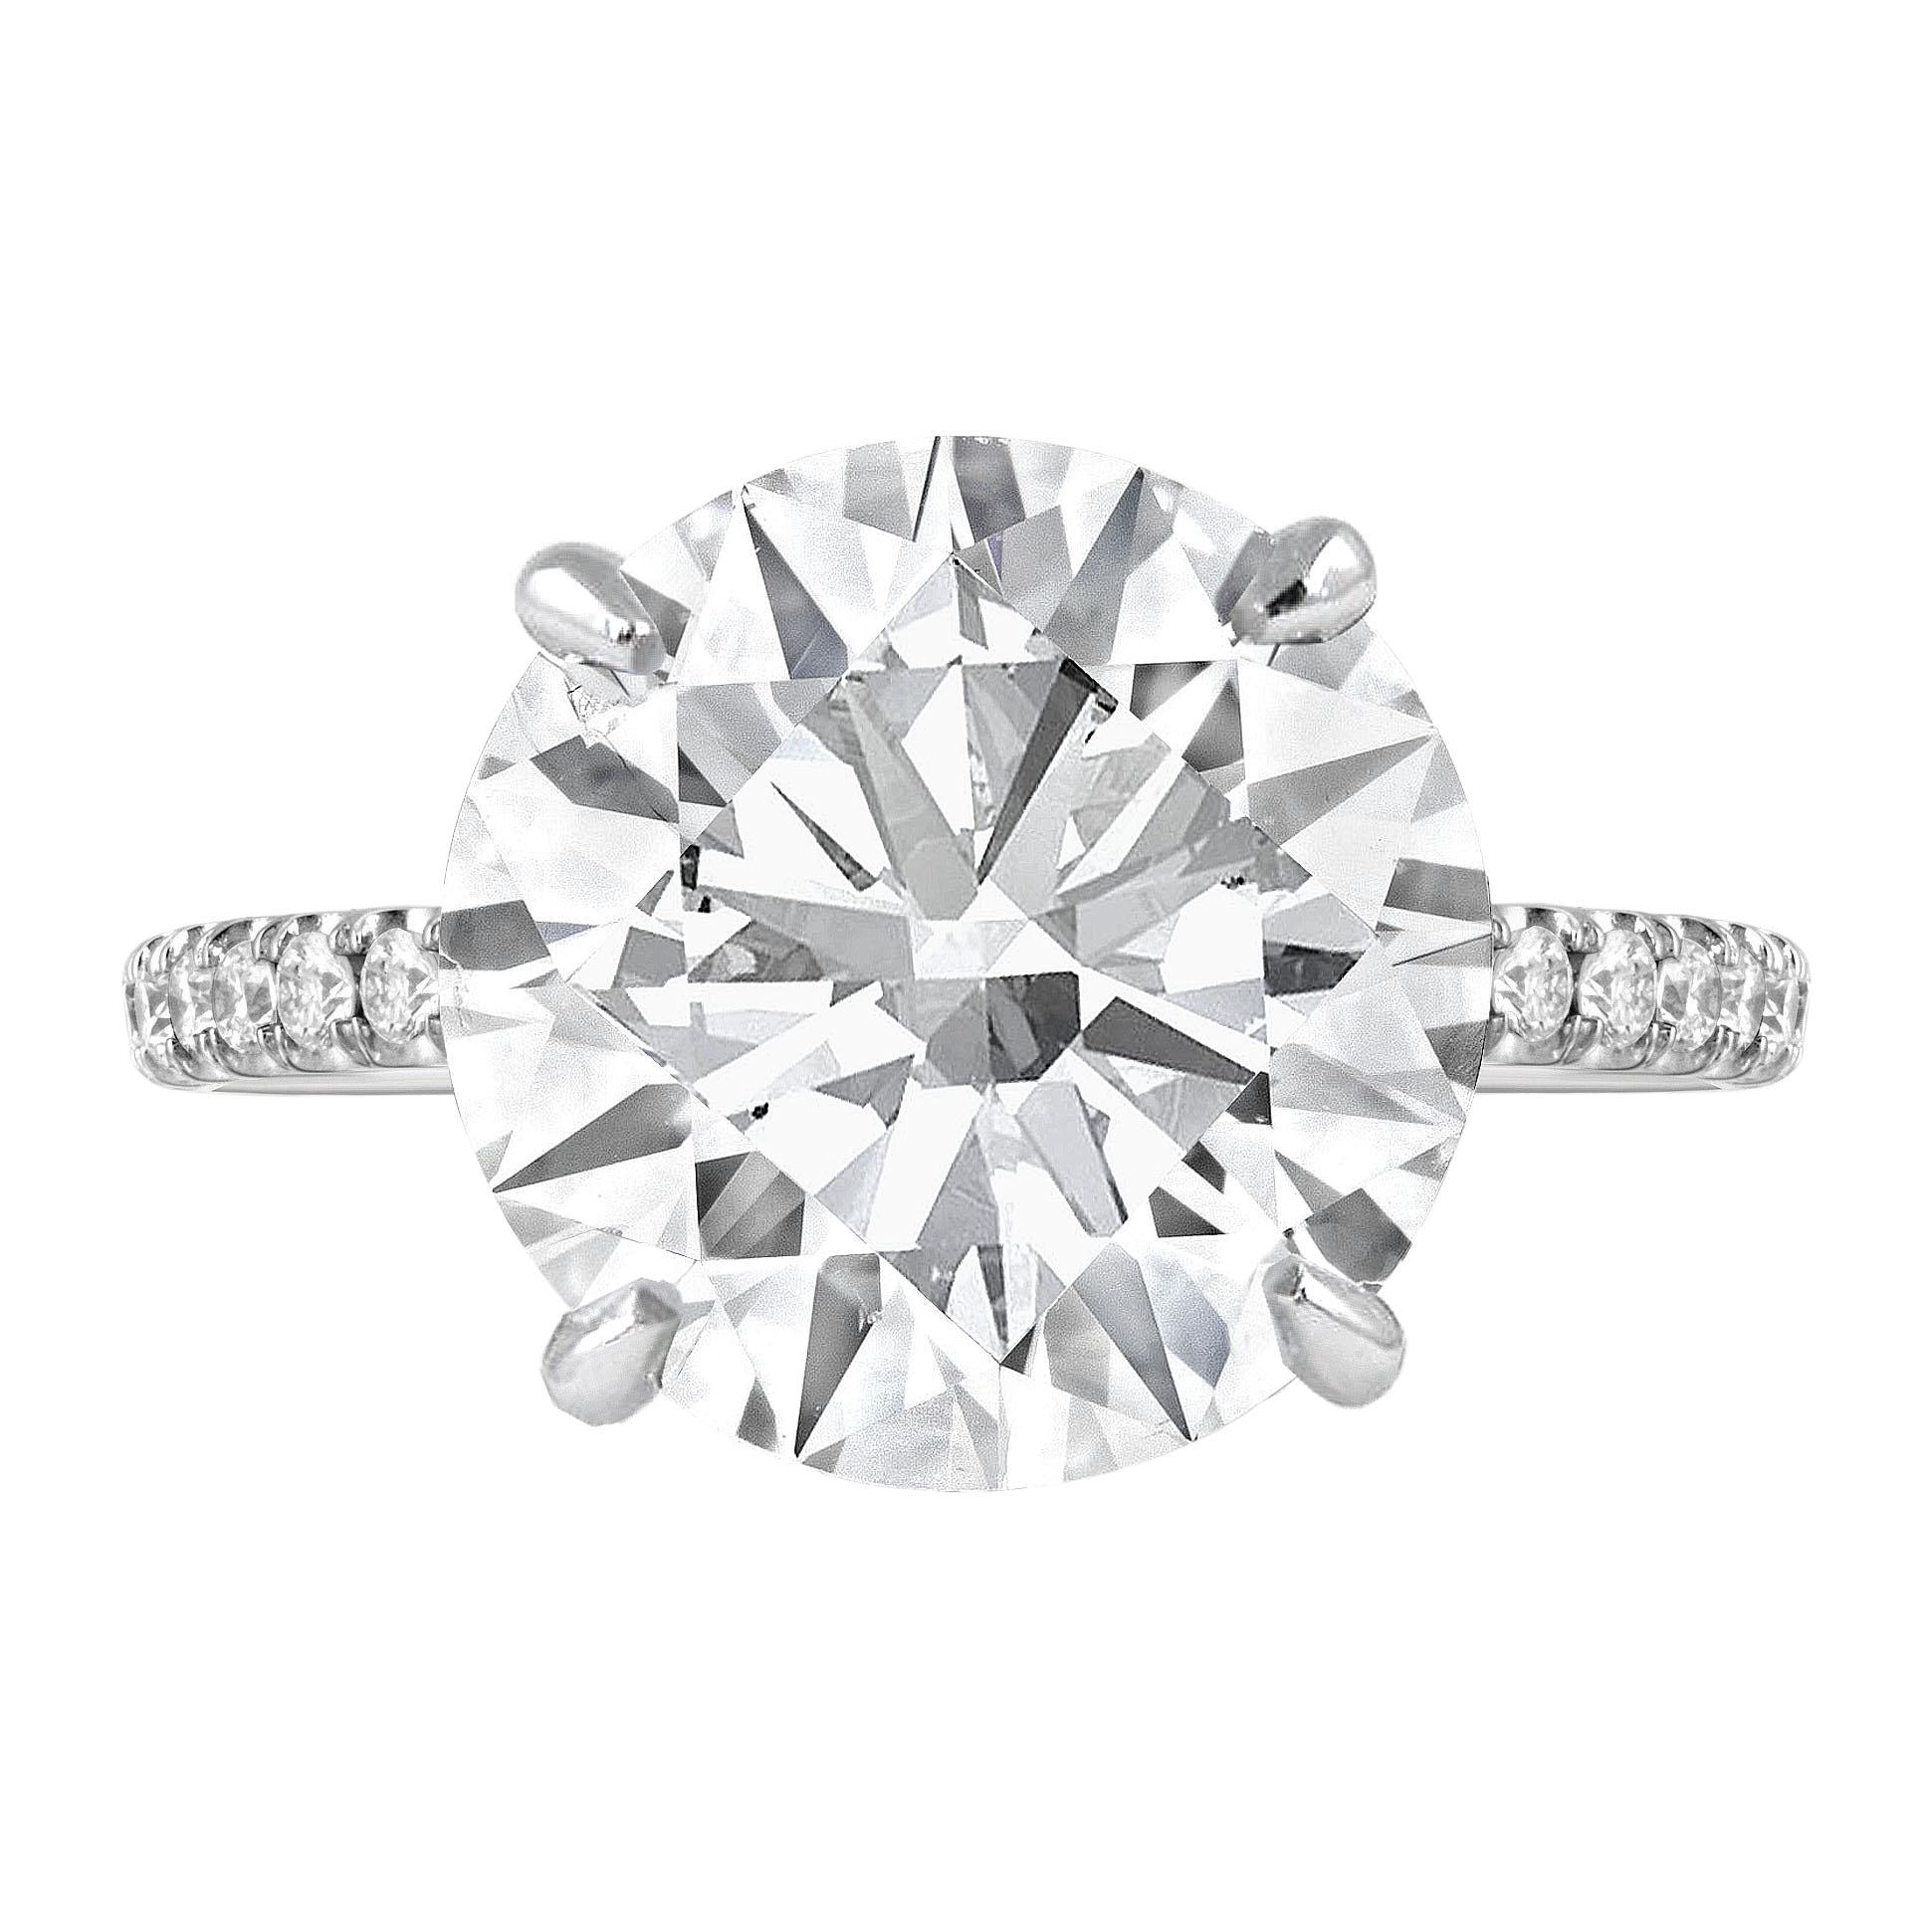 Behold the exquisite elegance of this ring featuring a dazzling GIA-certified 5carat round diamond, boasting exceptional D color and Flawless clarity grades. Certified by the prestigious Gemological Institute of America (GIA), this diamond radiates